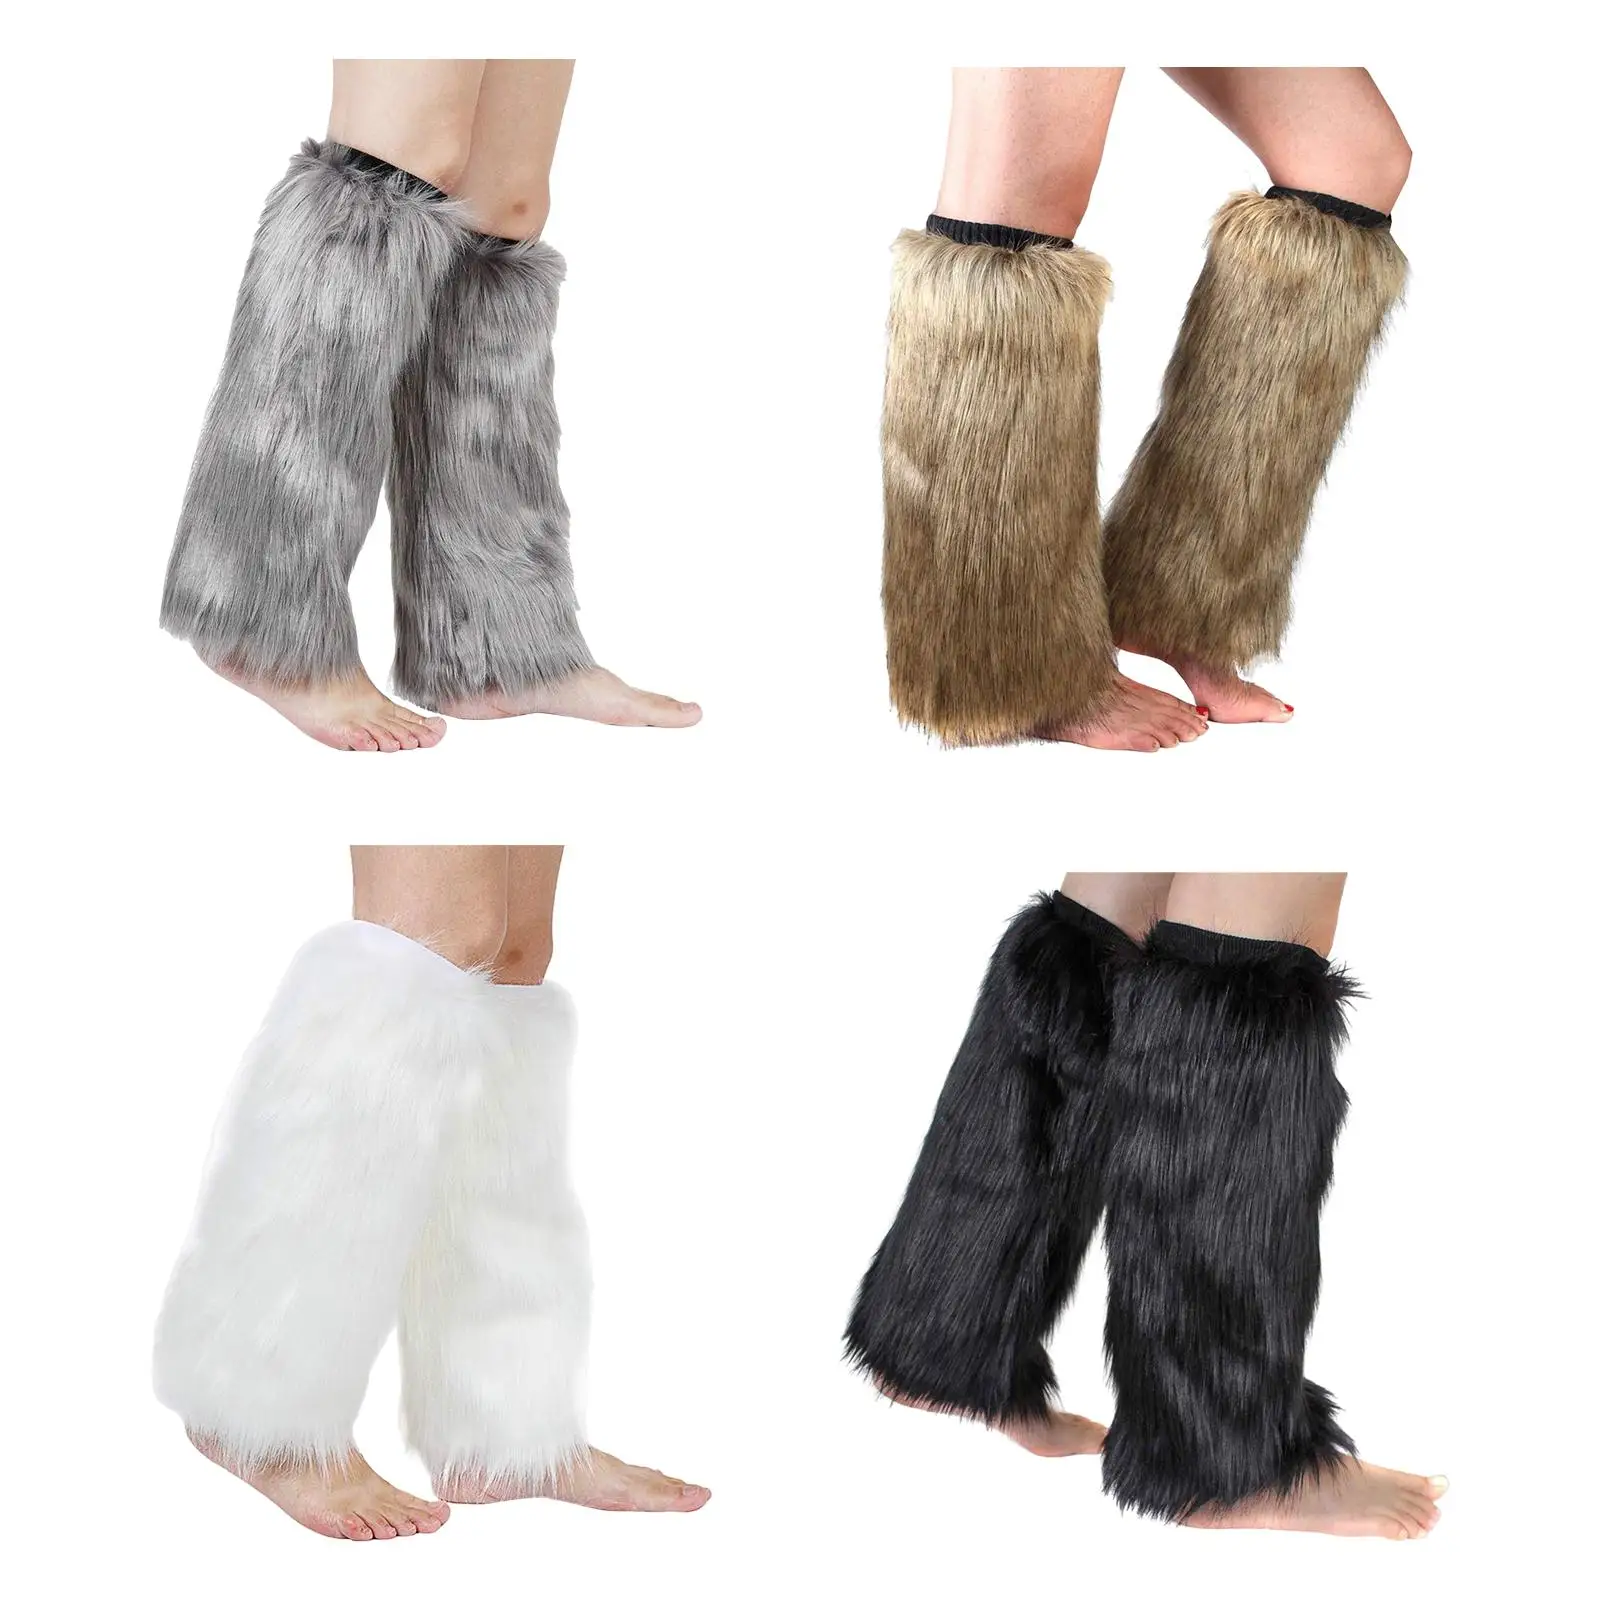 Leg Warmers Fuzzy Winter Ry Plush  Stockings Shaggy Boot Sleeves # for Cosplay Costume Santa  Adult